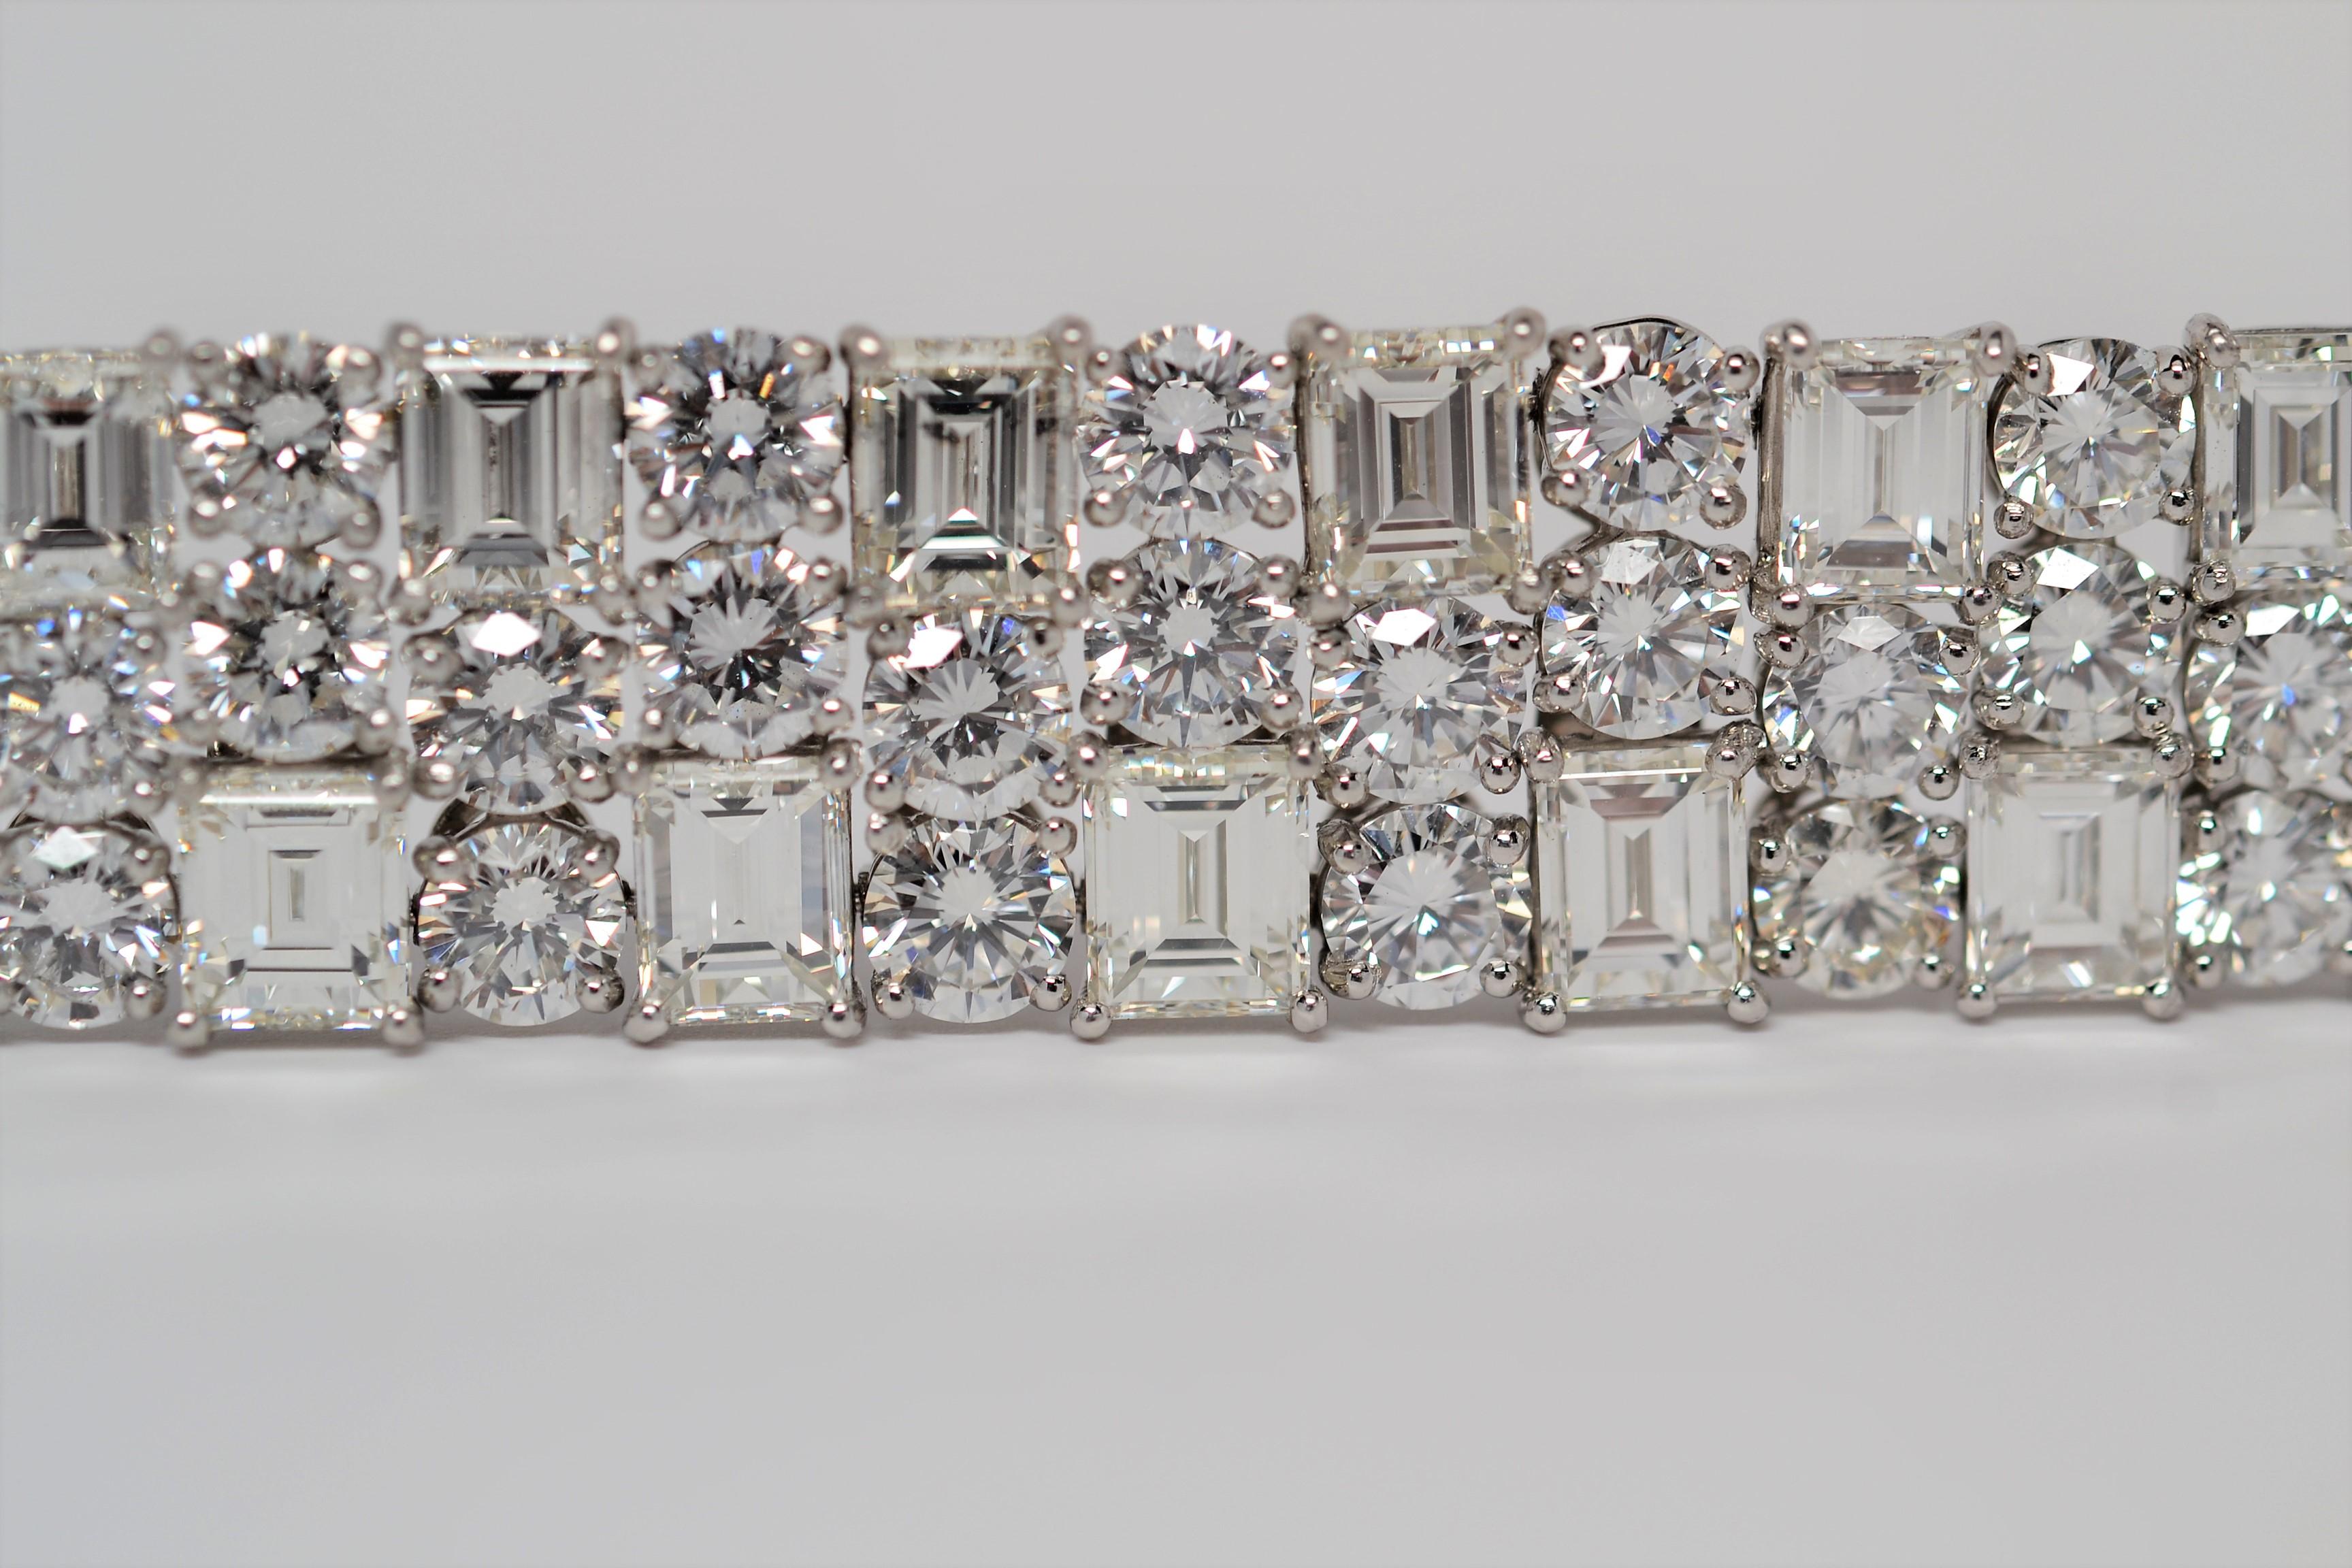 An amazing handmade bracelet set in Platinum with diamonds going all the way around. The Platinum bracelet is a three row layout with a staggered combination of Round Brilliant Cut Diamonds and Emerald Cut Diamonds. Custom made Platinum baskets with